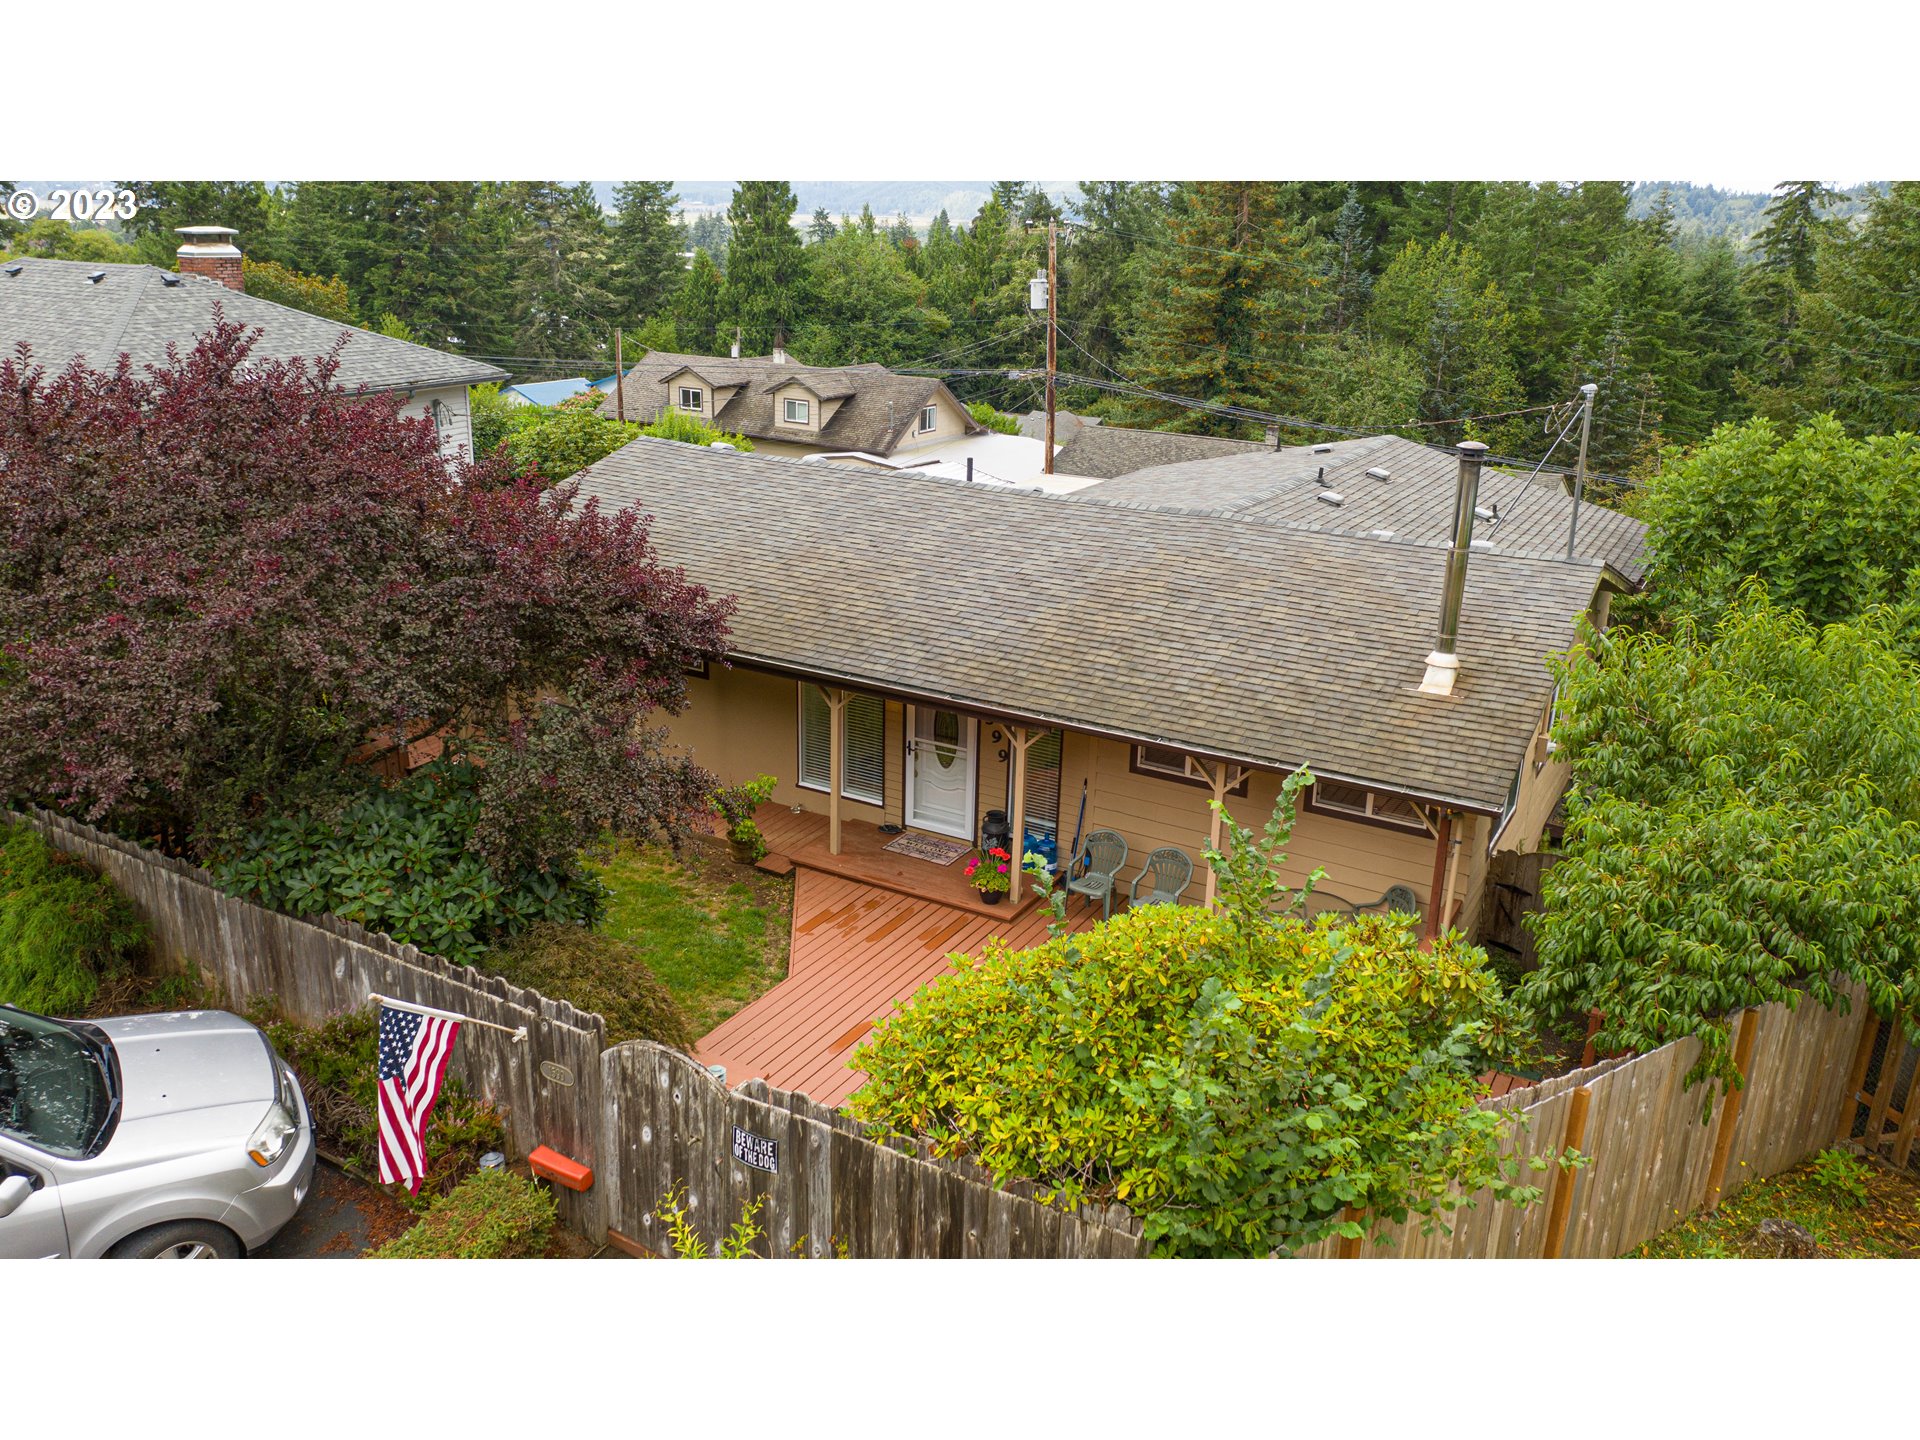 1599 N IRVING ST, Coquille, OR 97423